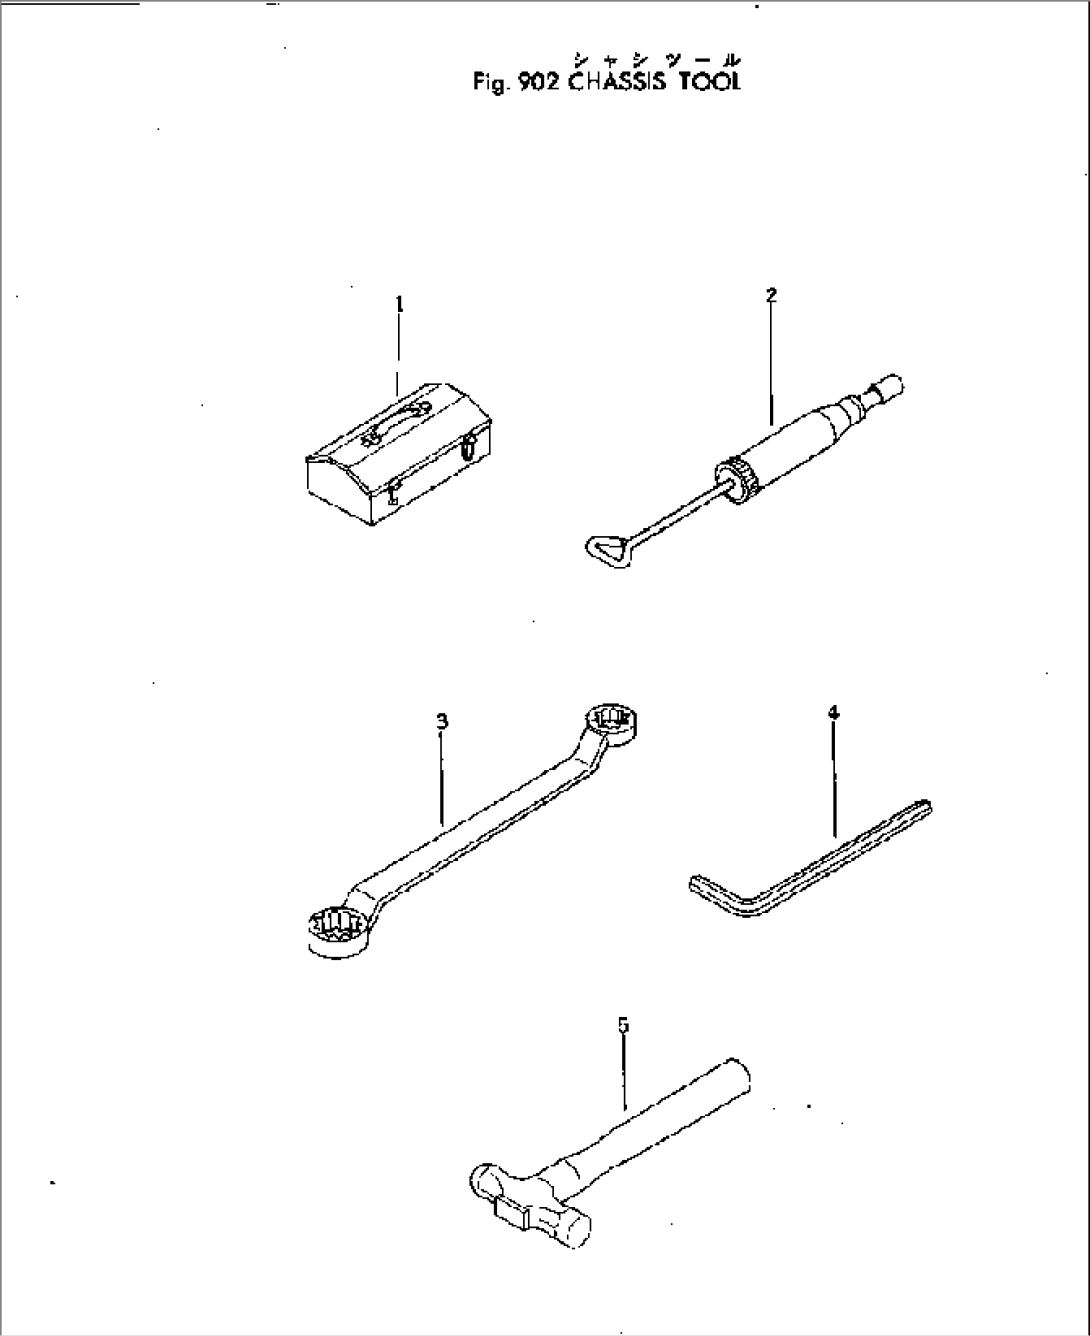 CHASSIS TOOL